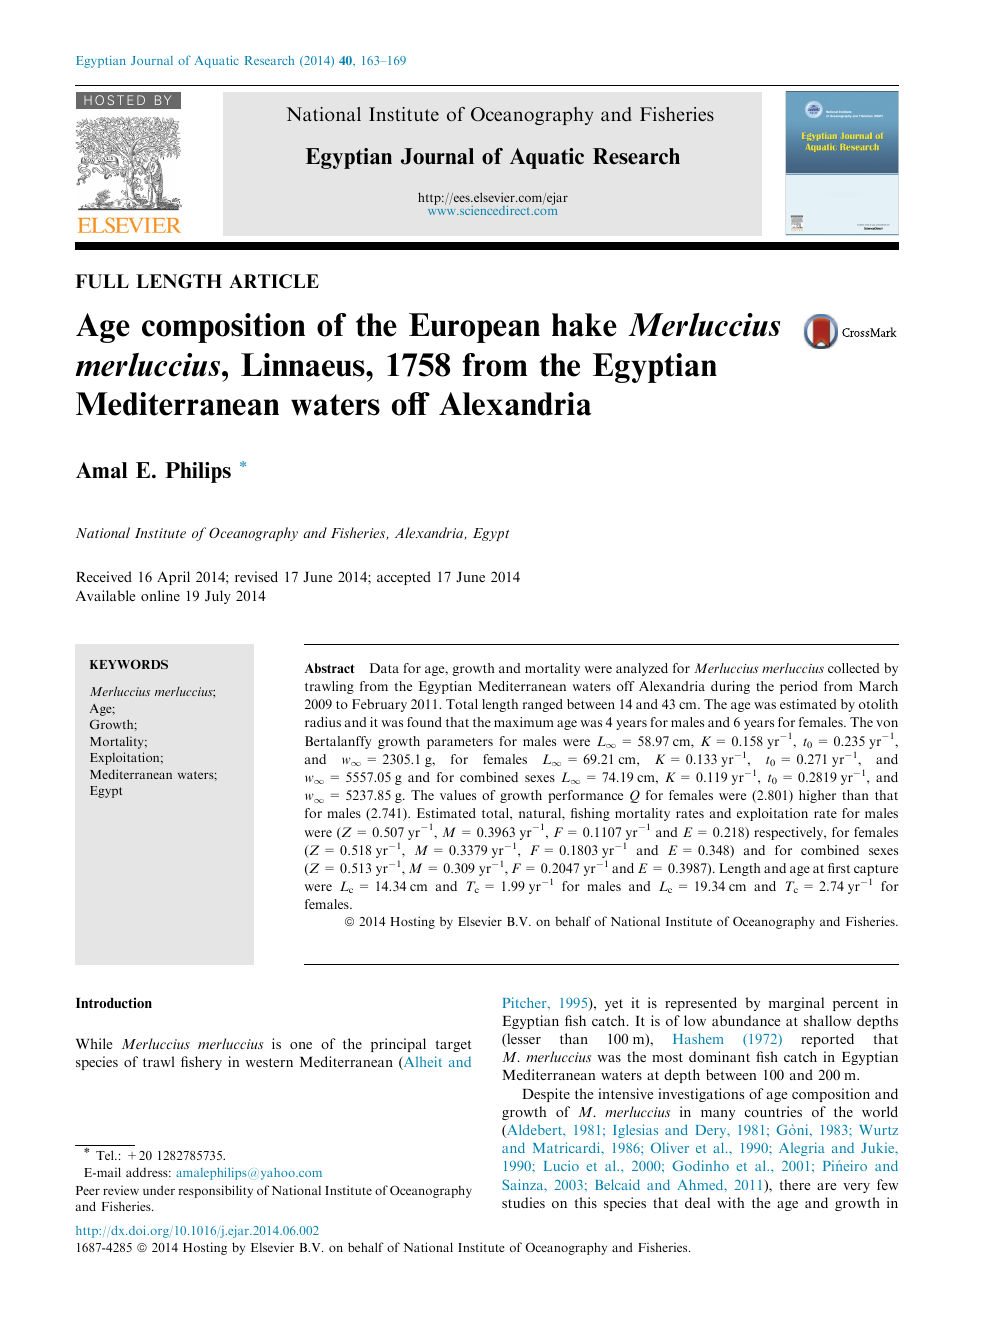 Age Composition Of The European Hake Merluccius Merluccius Linnaeus 1758 From The Egyptian Mediterranean Waters Off Alexandria Topic Of Research Paper In Biological Sciences Download Scholarly Article Pdf And Read For